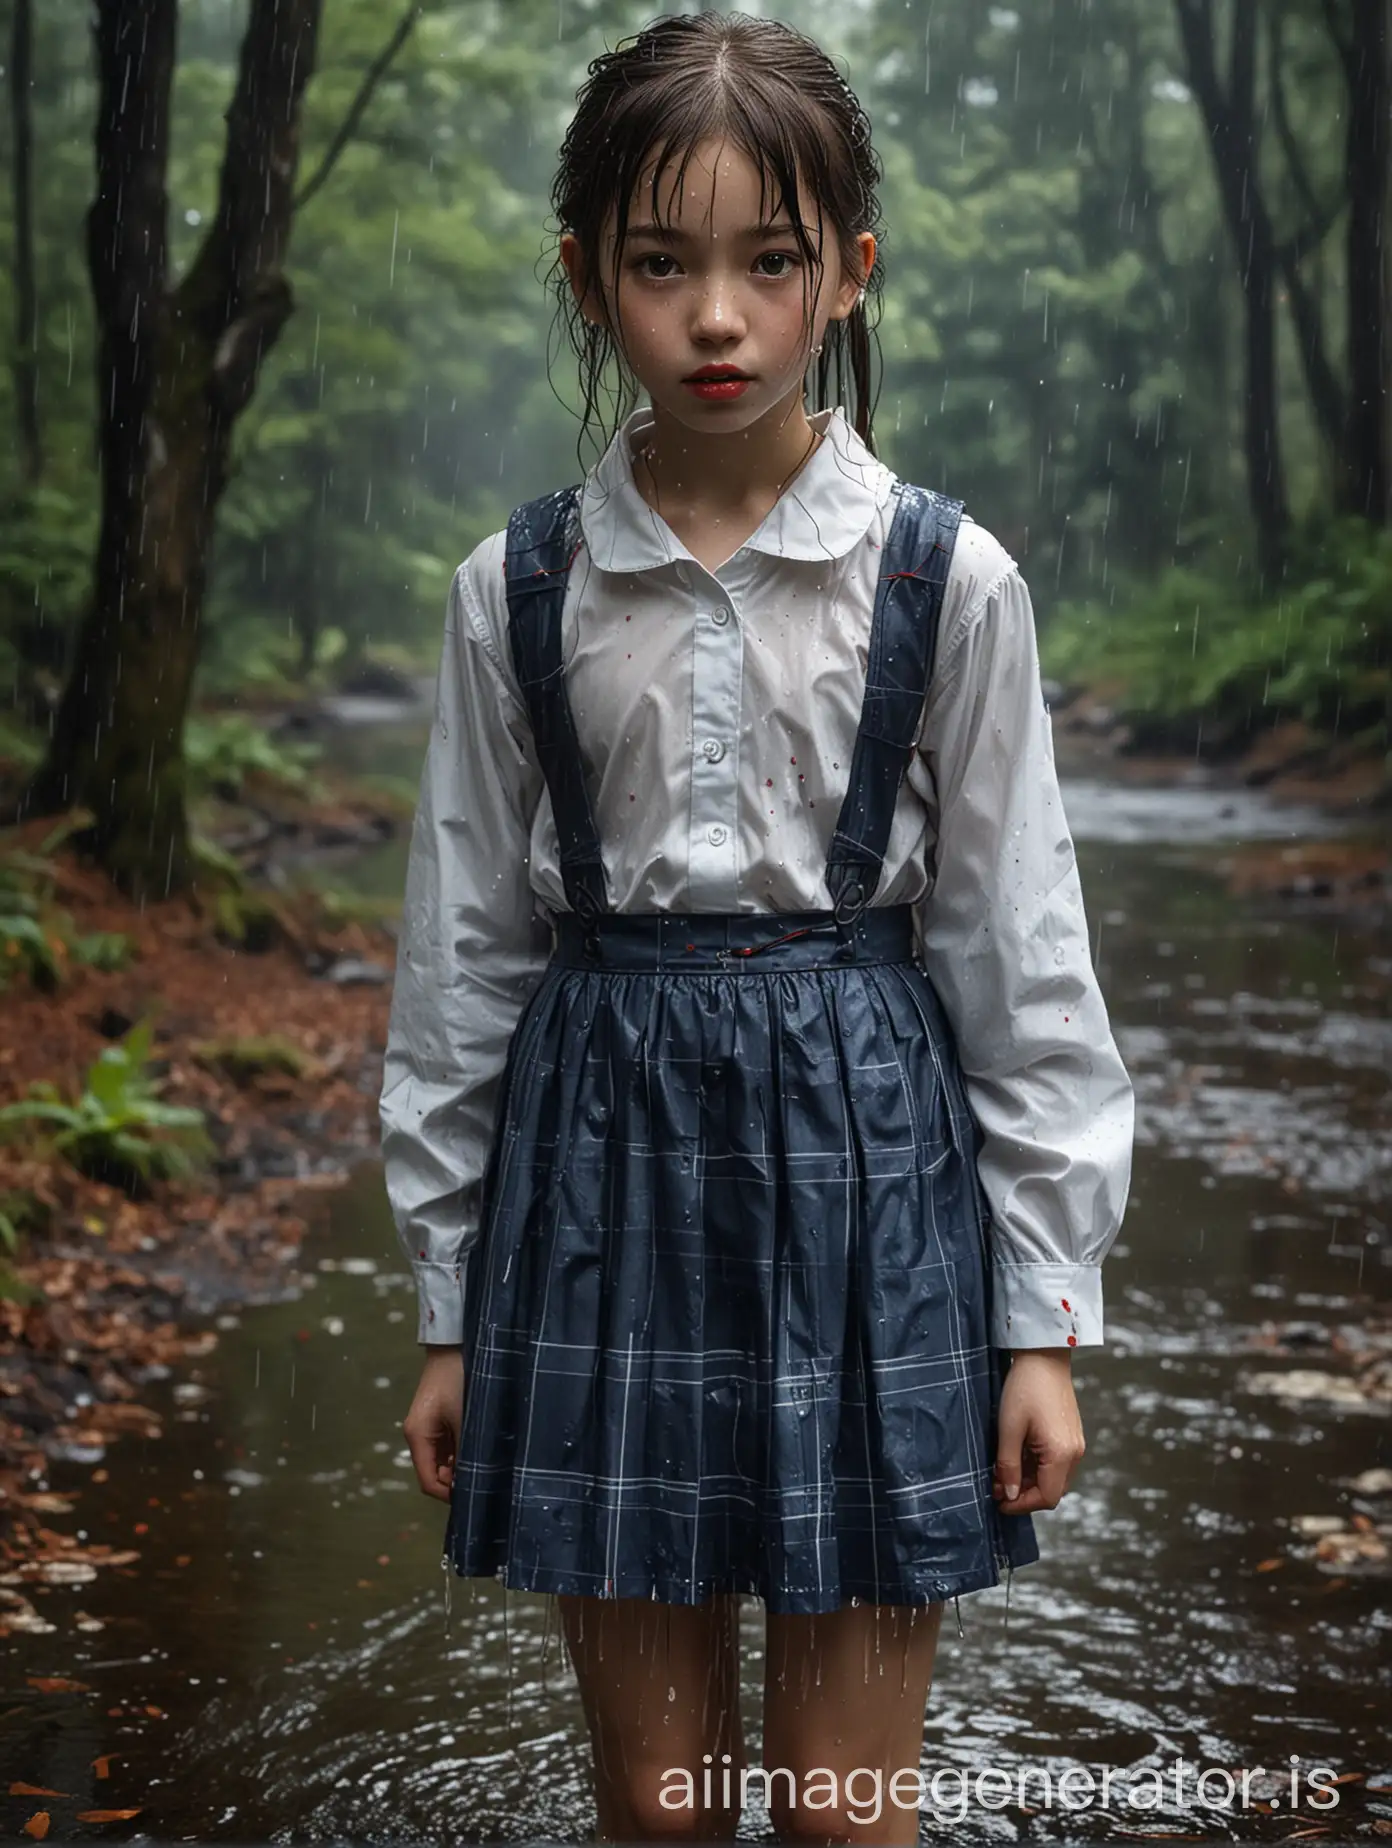 Young-Girl-in-Rain-Soaked-Japanese-School-Uniform